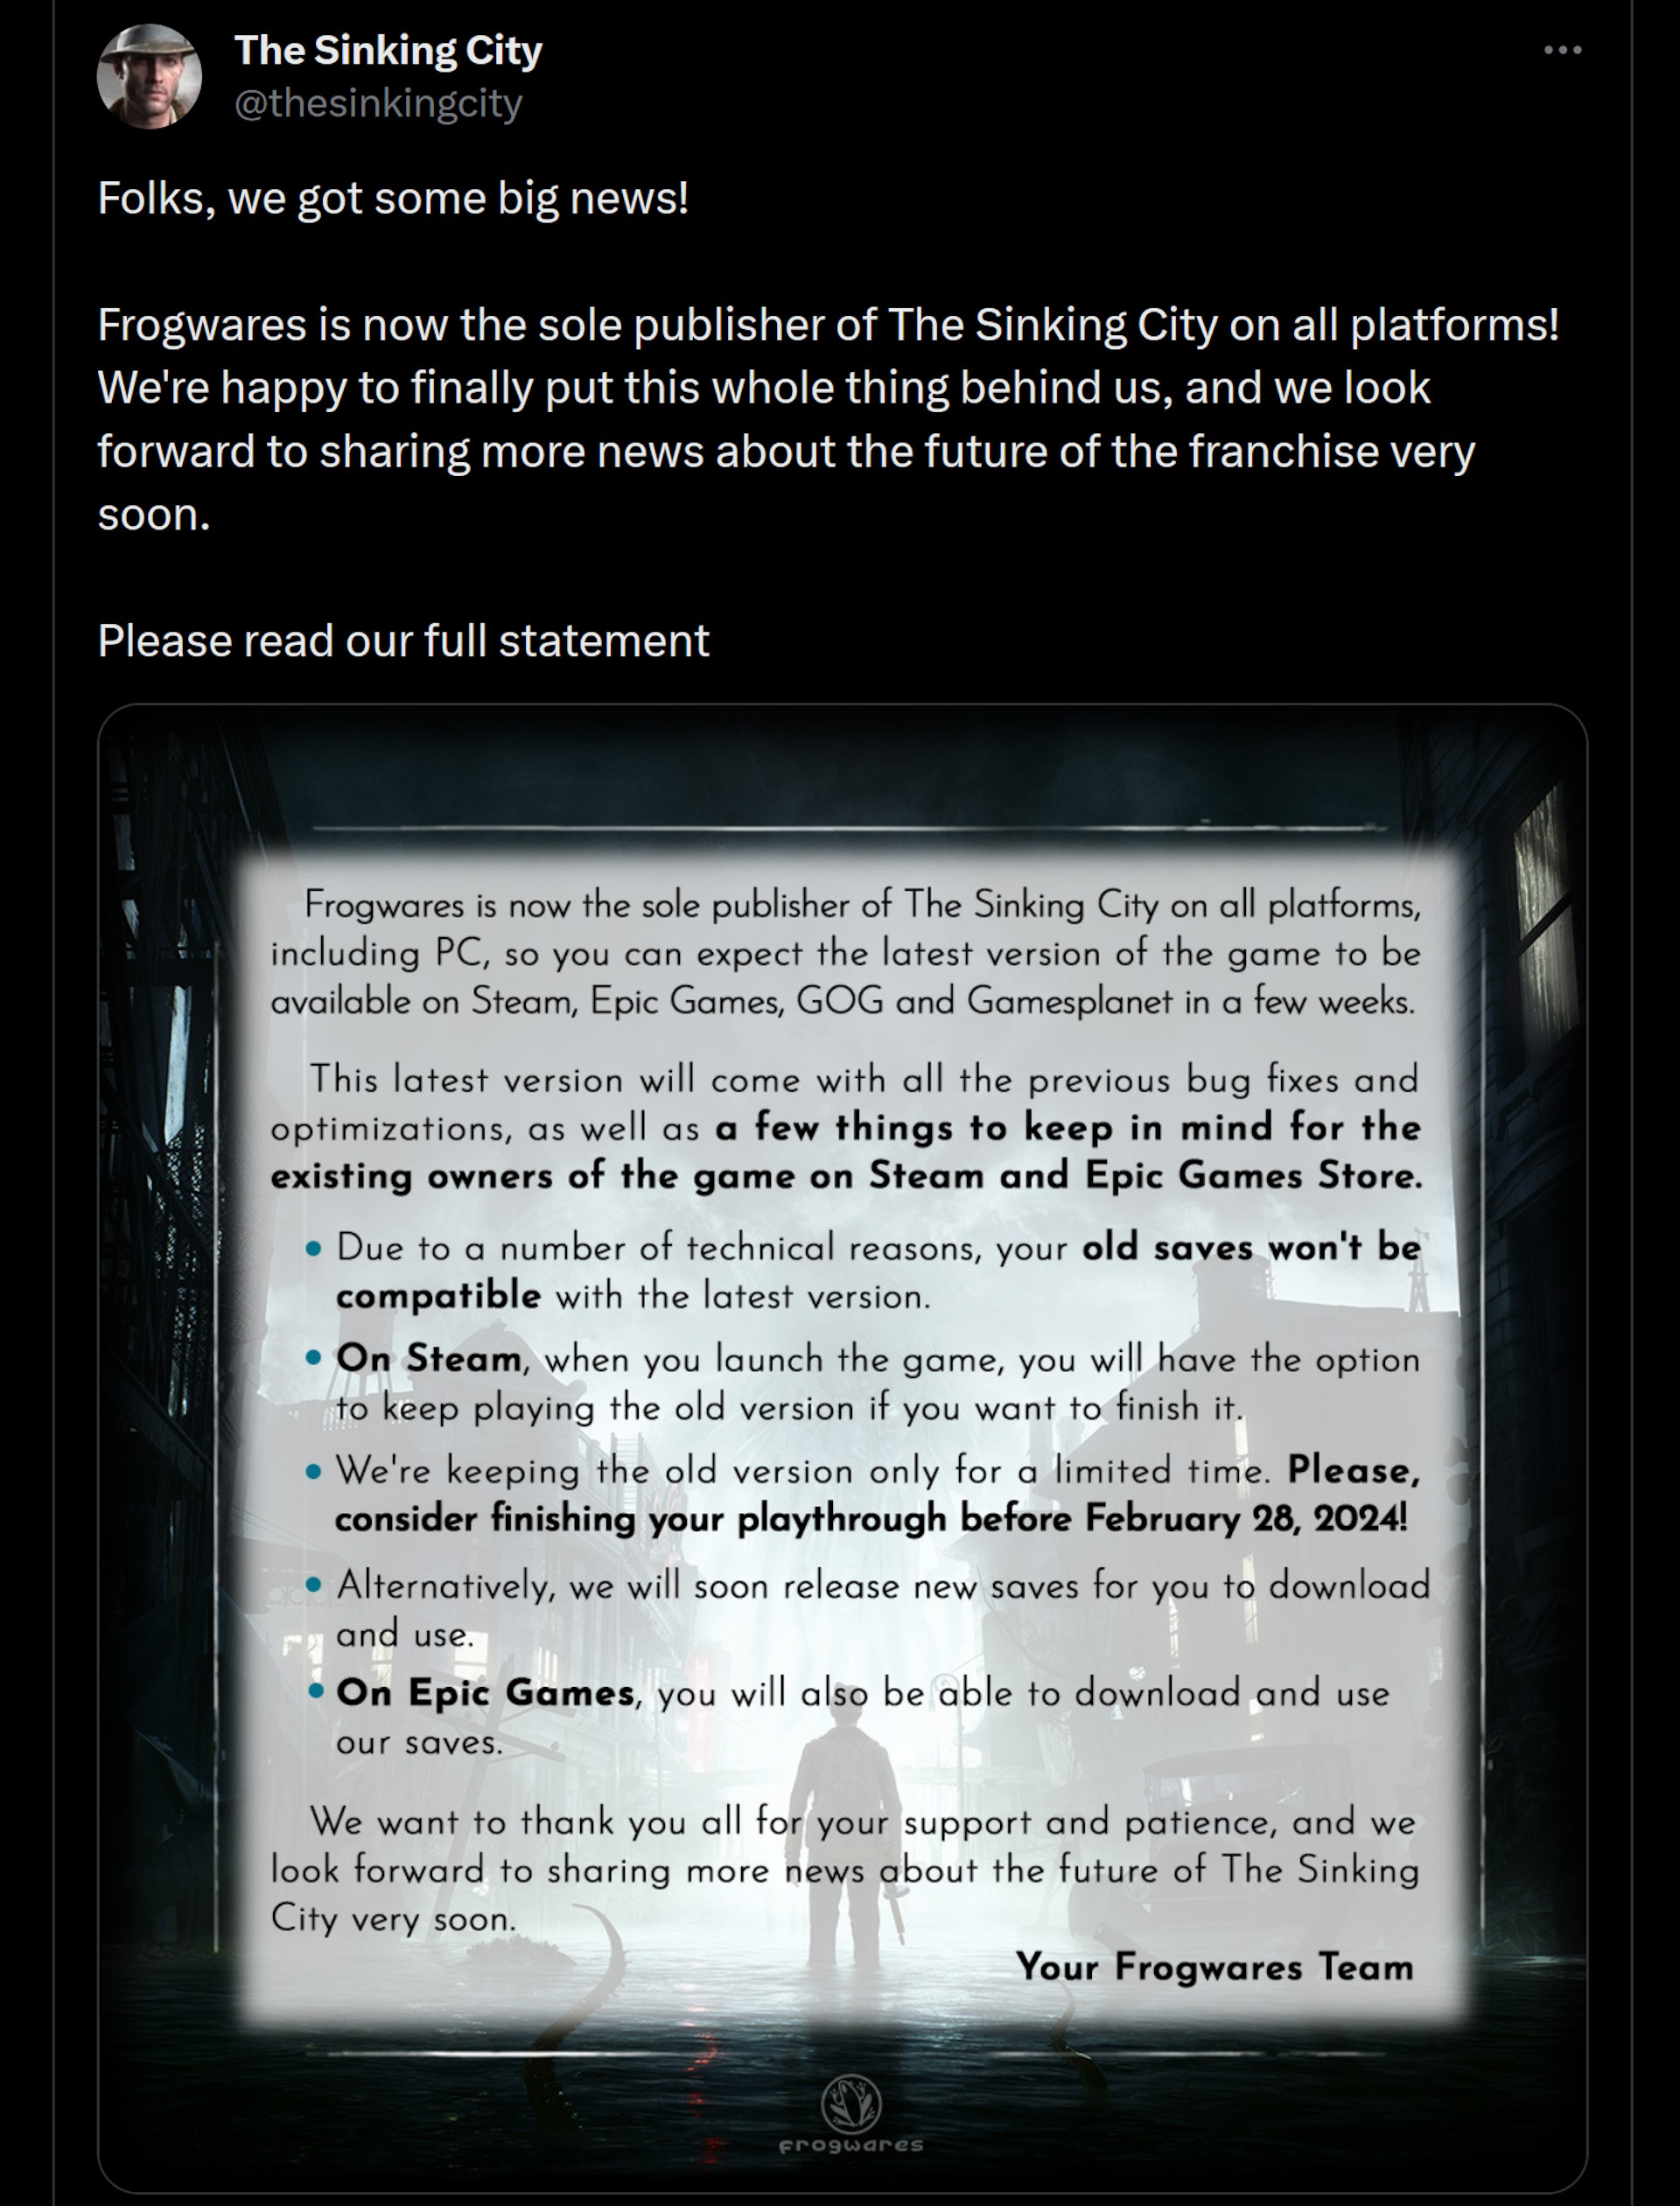 Folks, we got some big news! Frogwares is now the sole publisher of The Sinking City on all platforms! We're happy to finally put this whole thing behind us, and we look forward to sharing more news about the future of the franchise very soon. Please read our full statement